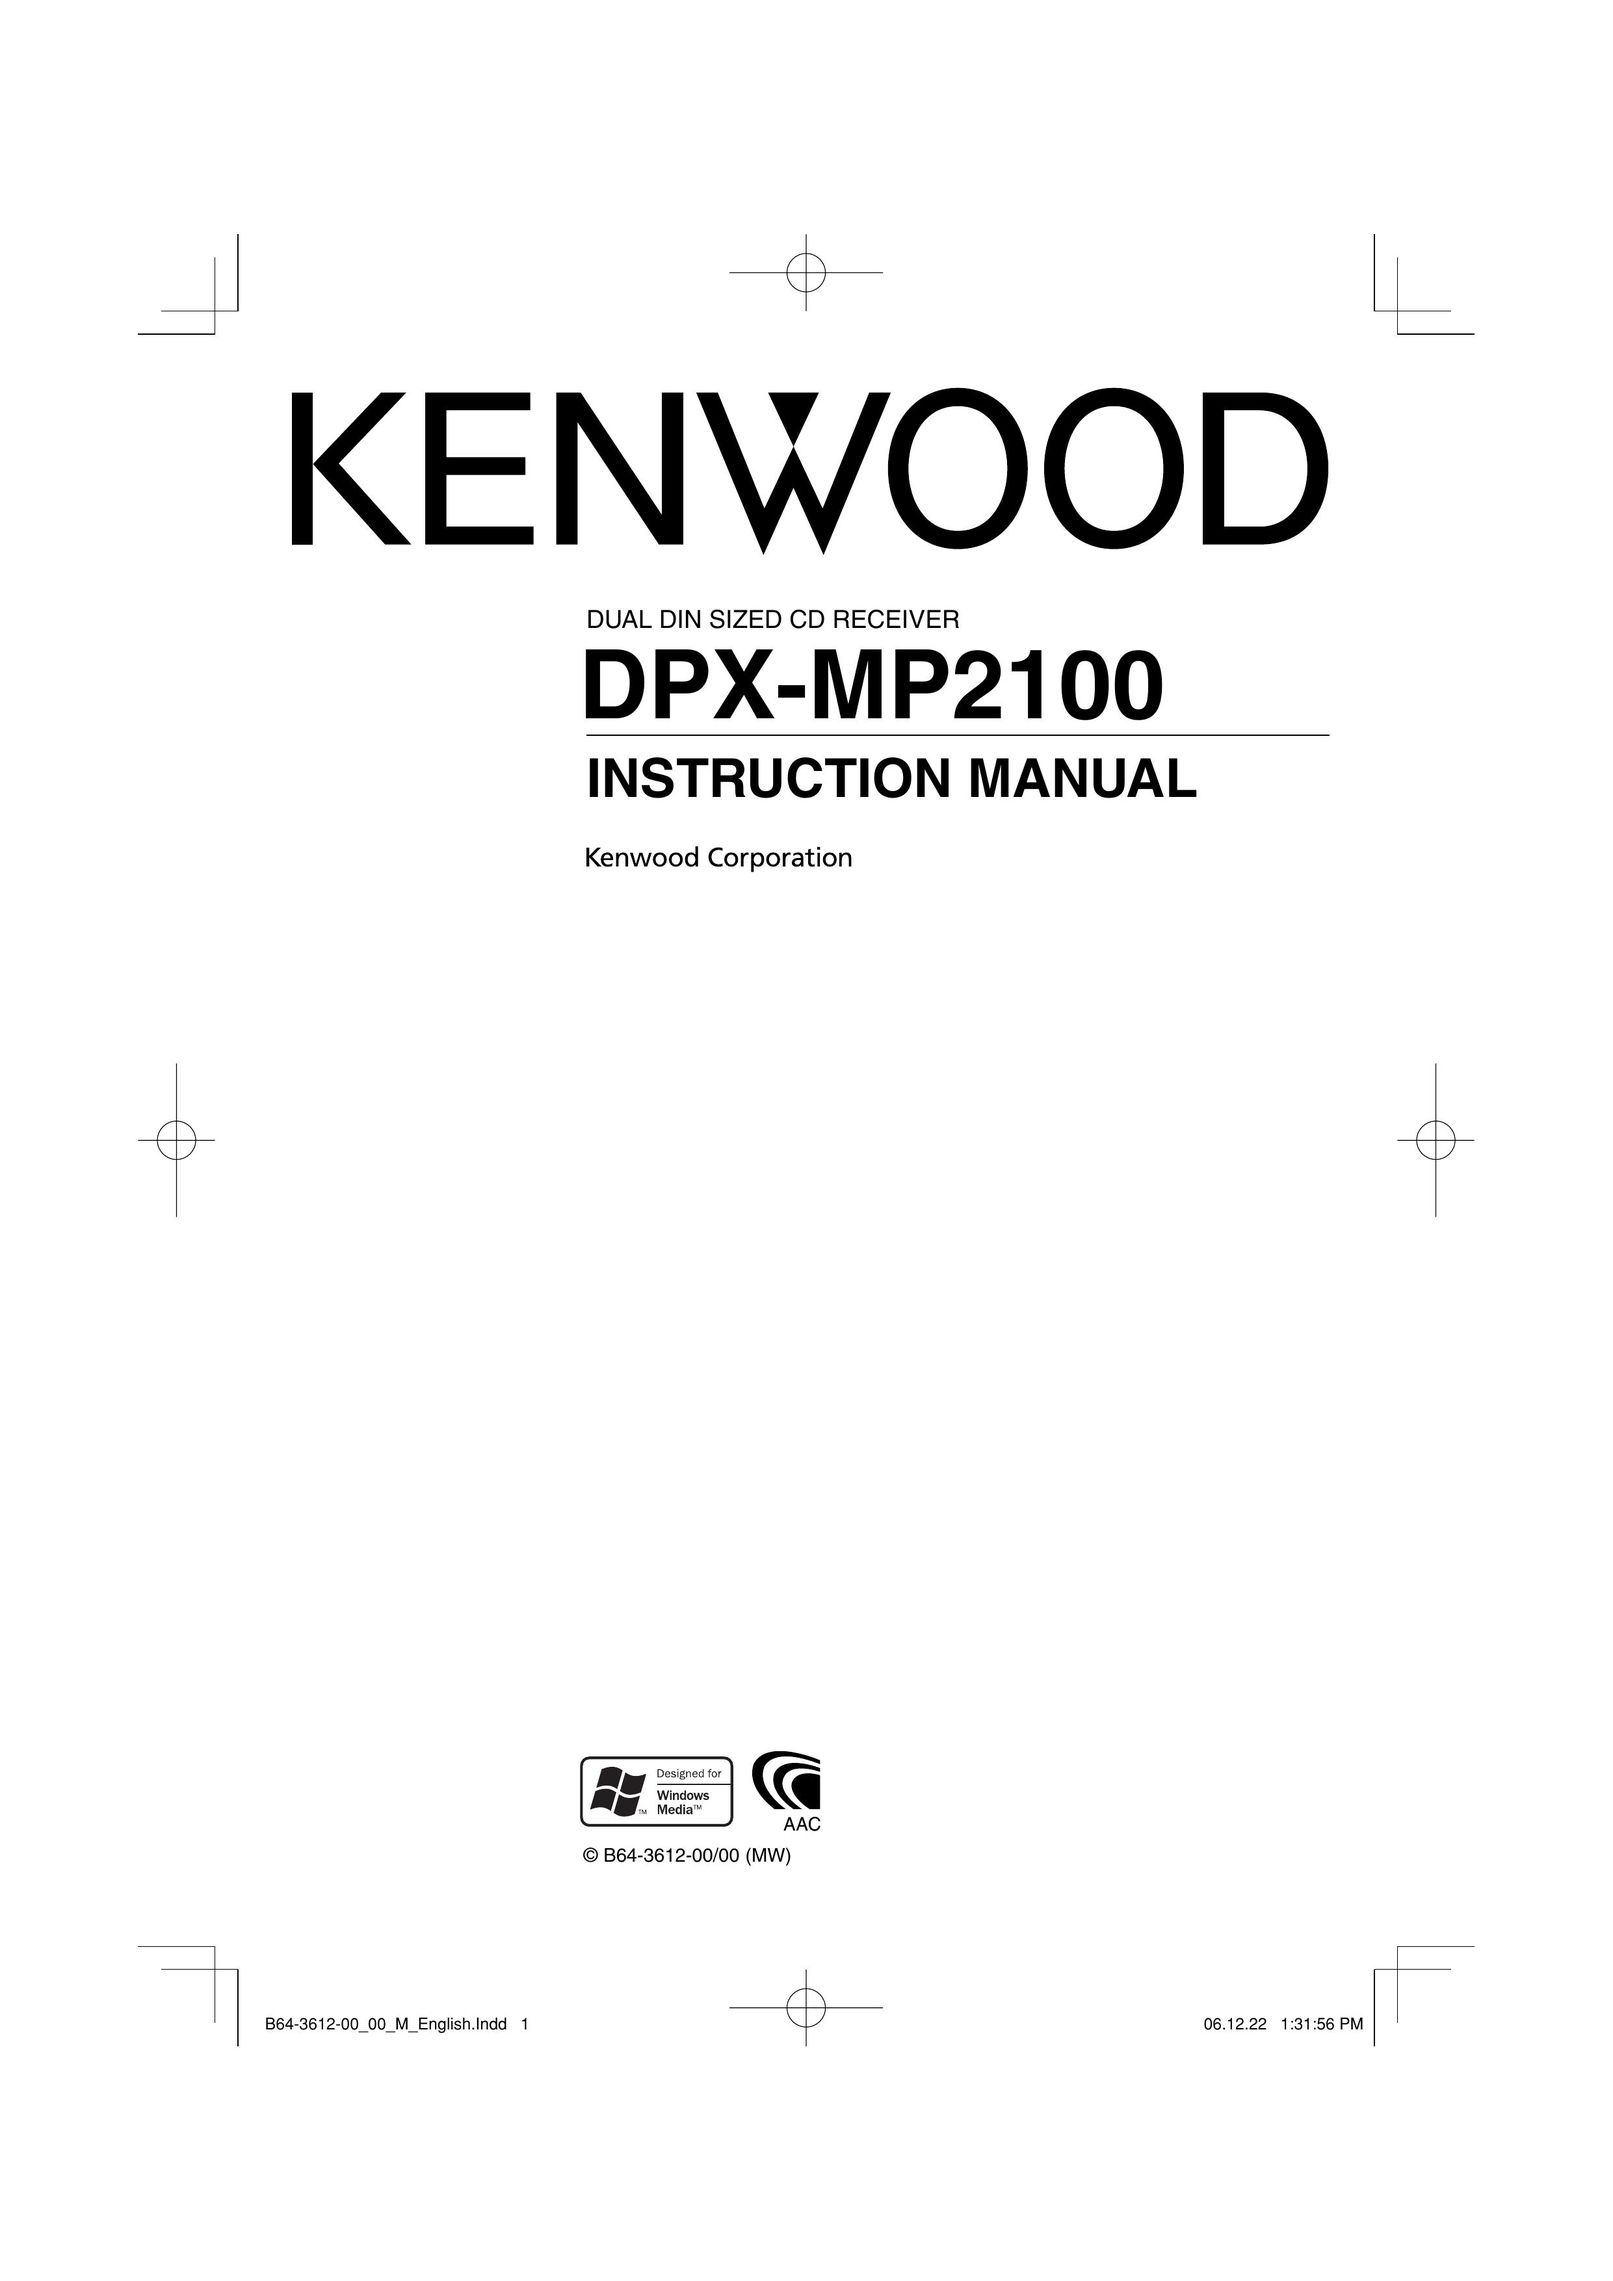 Kenwood DPX-MP2100 Car Stereo System User Manual